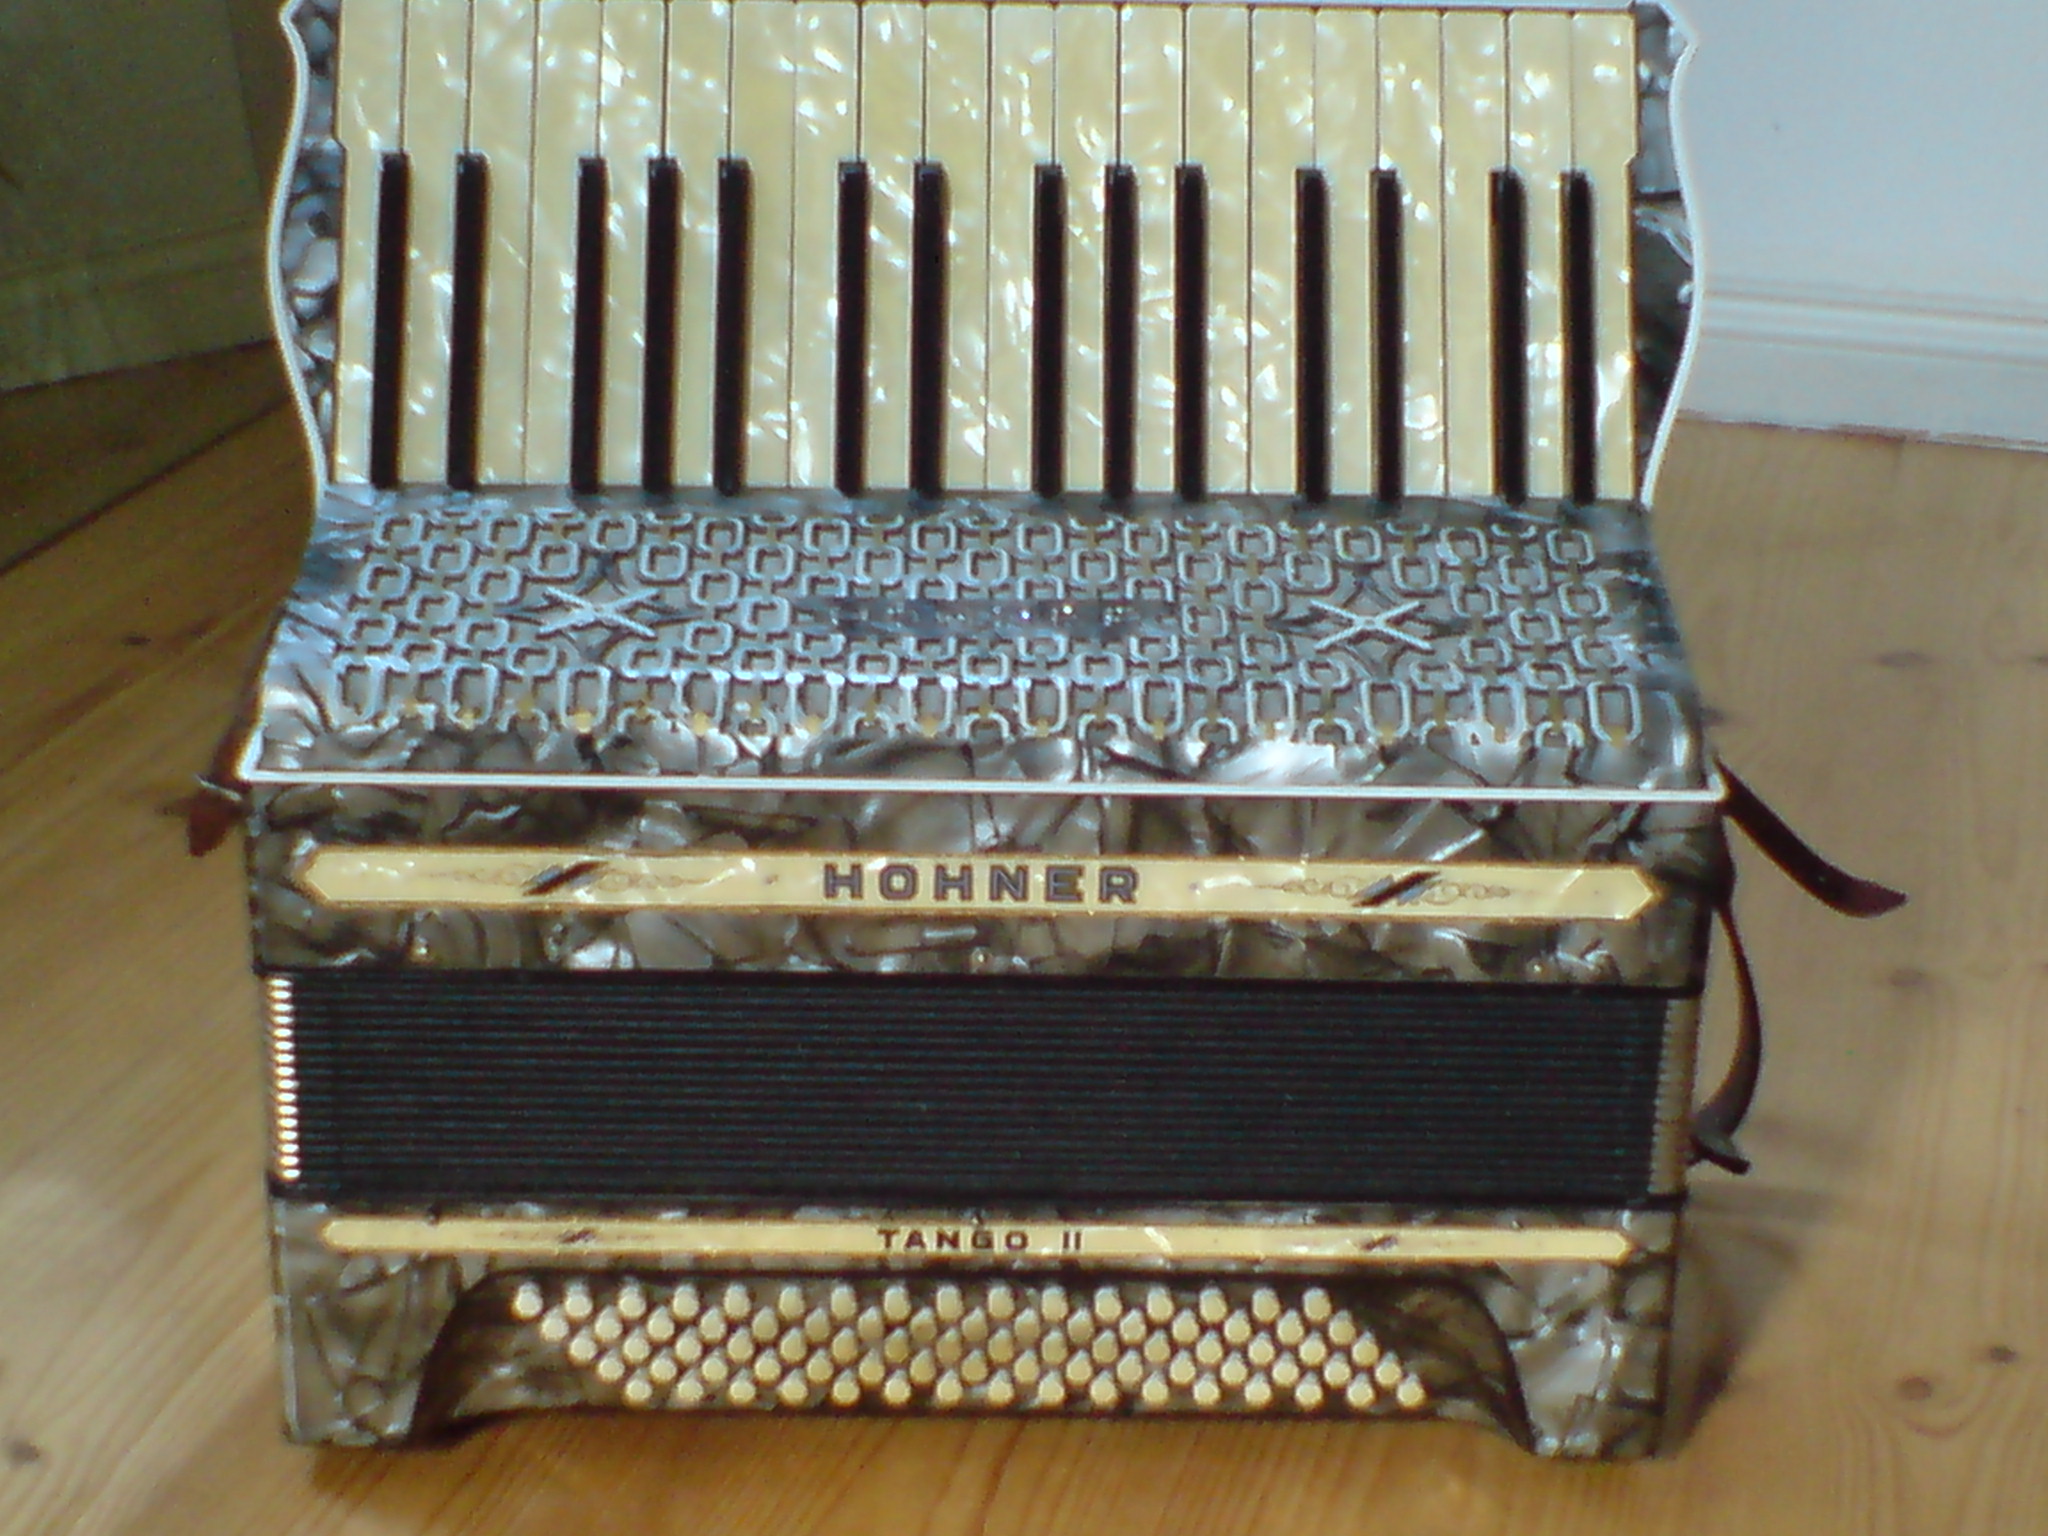 Hohner Wallpapers